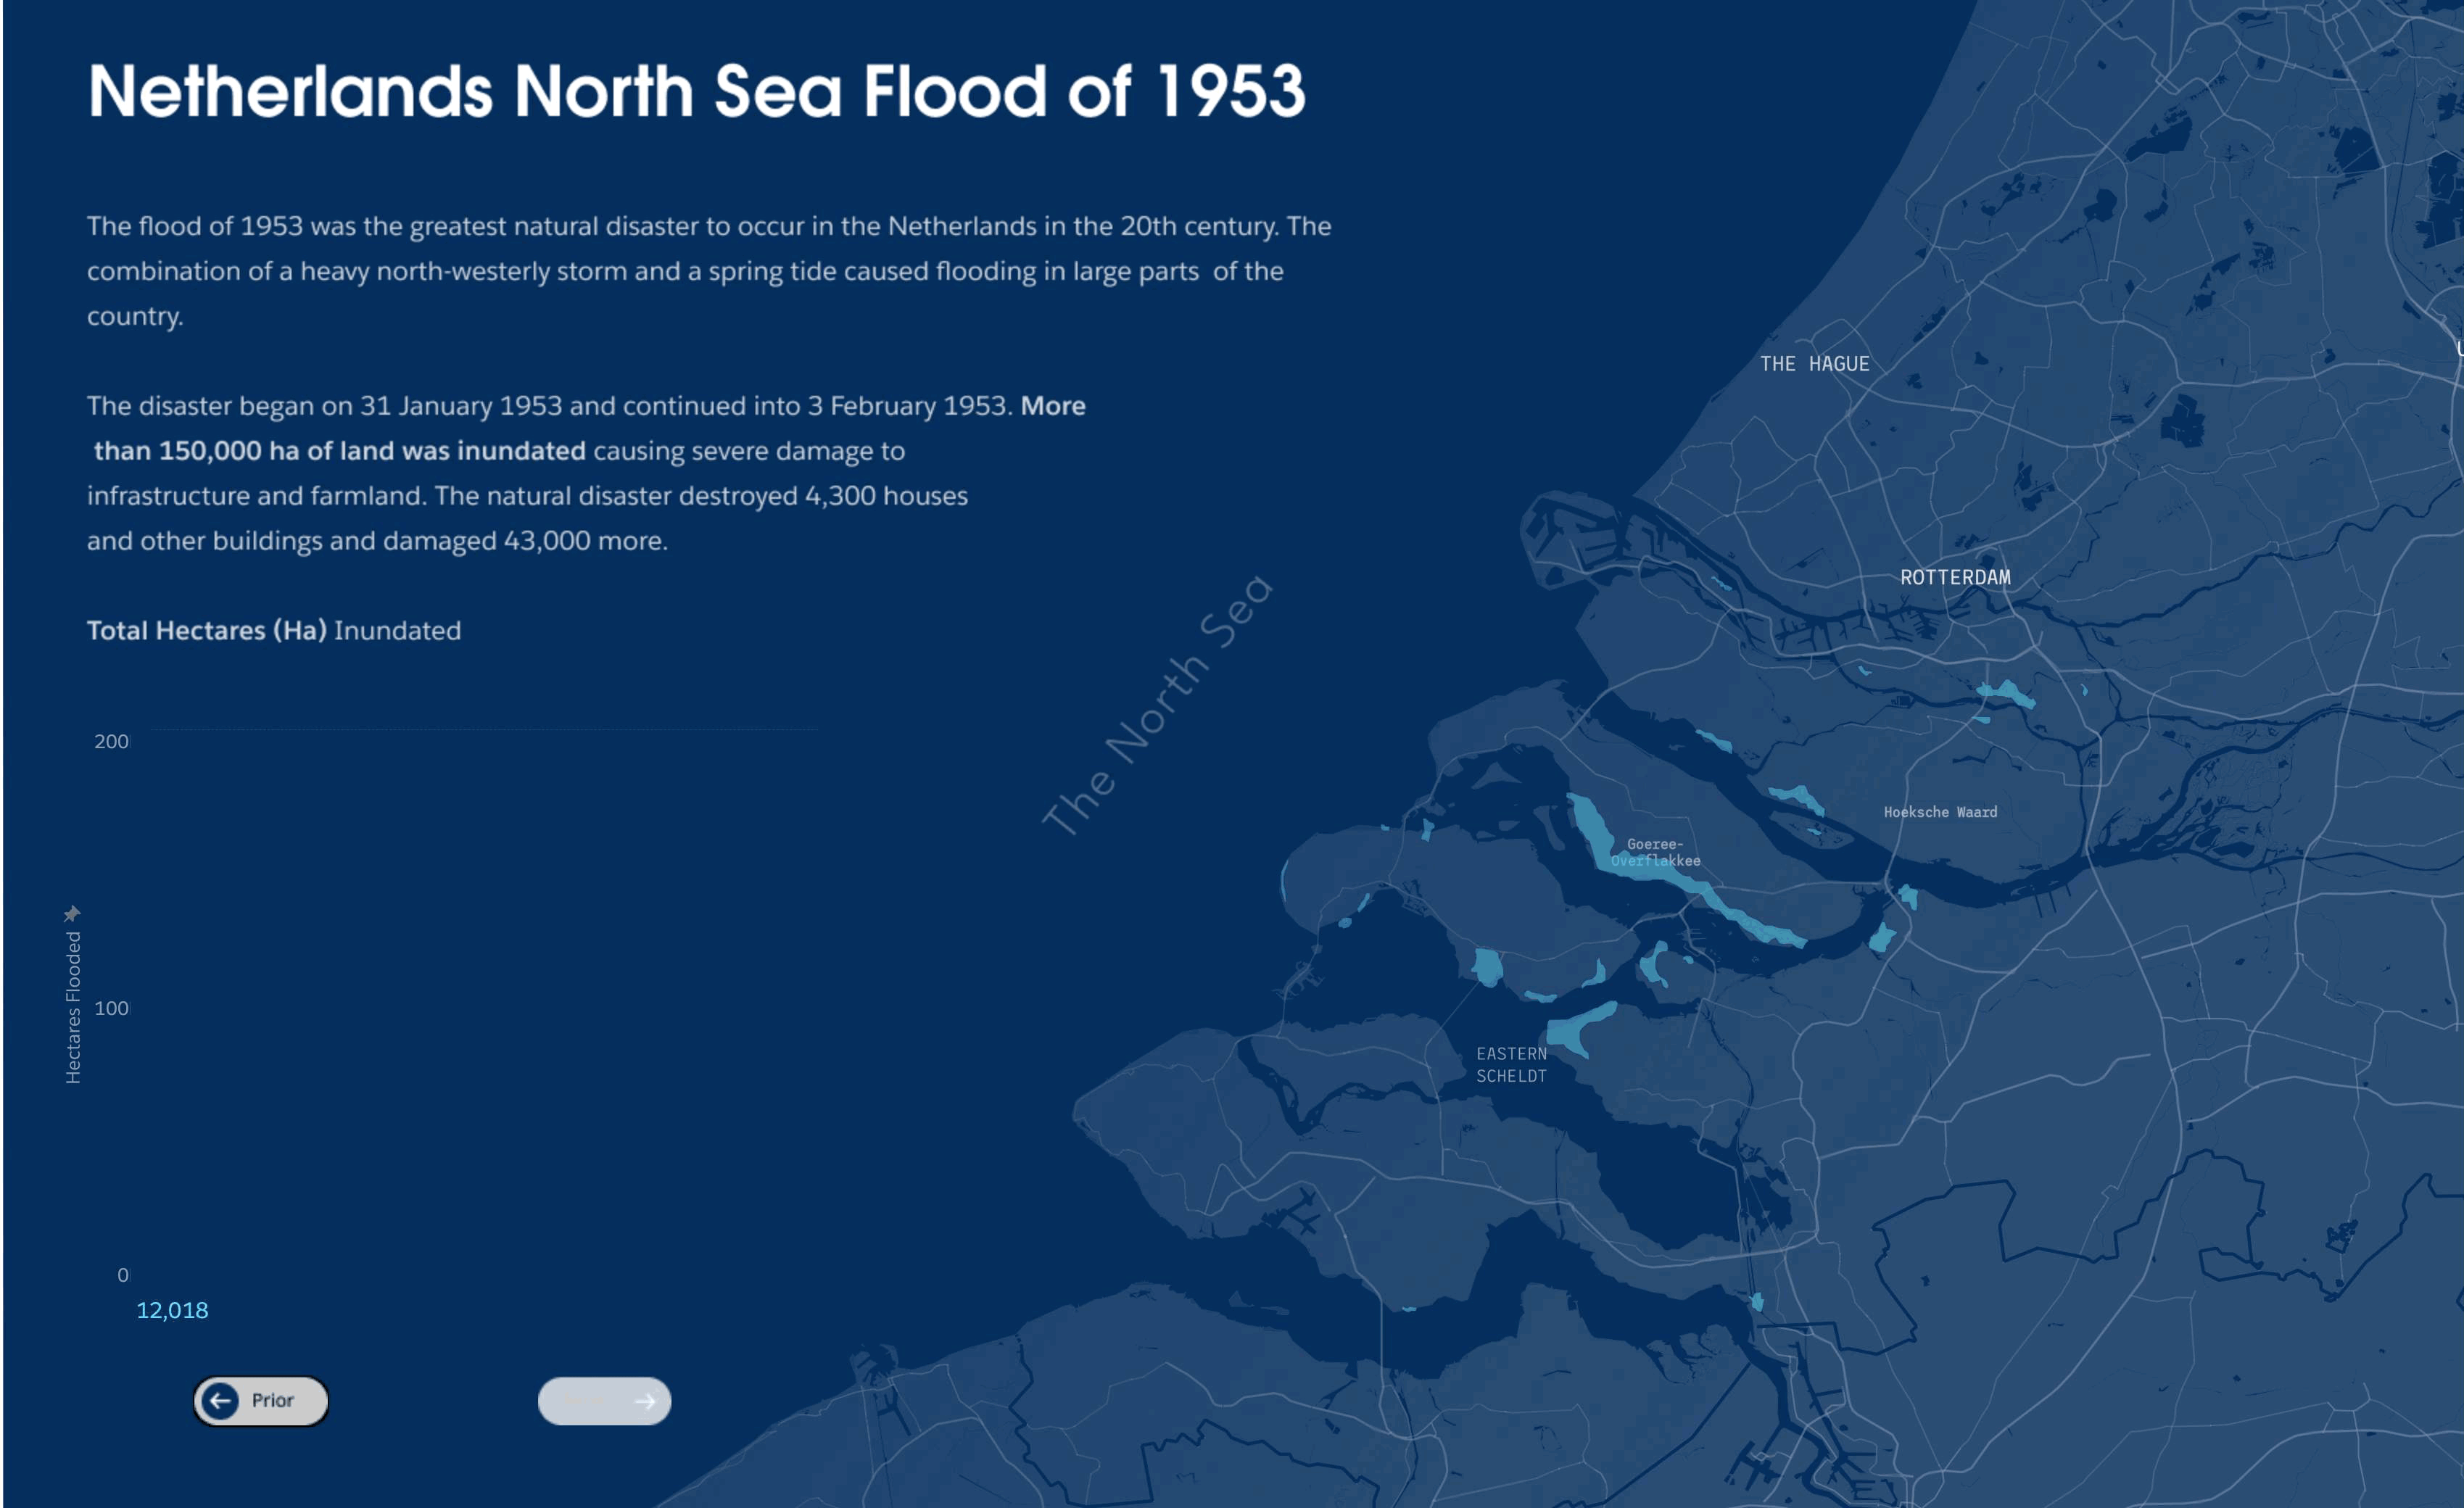 Data Visualization of the Netherlands North Sea Flood of 1953.